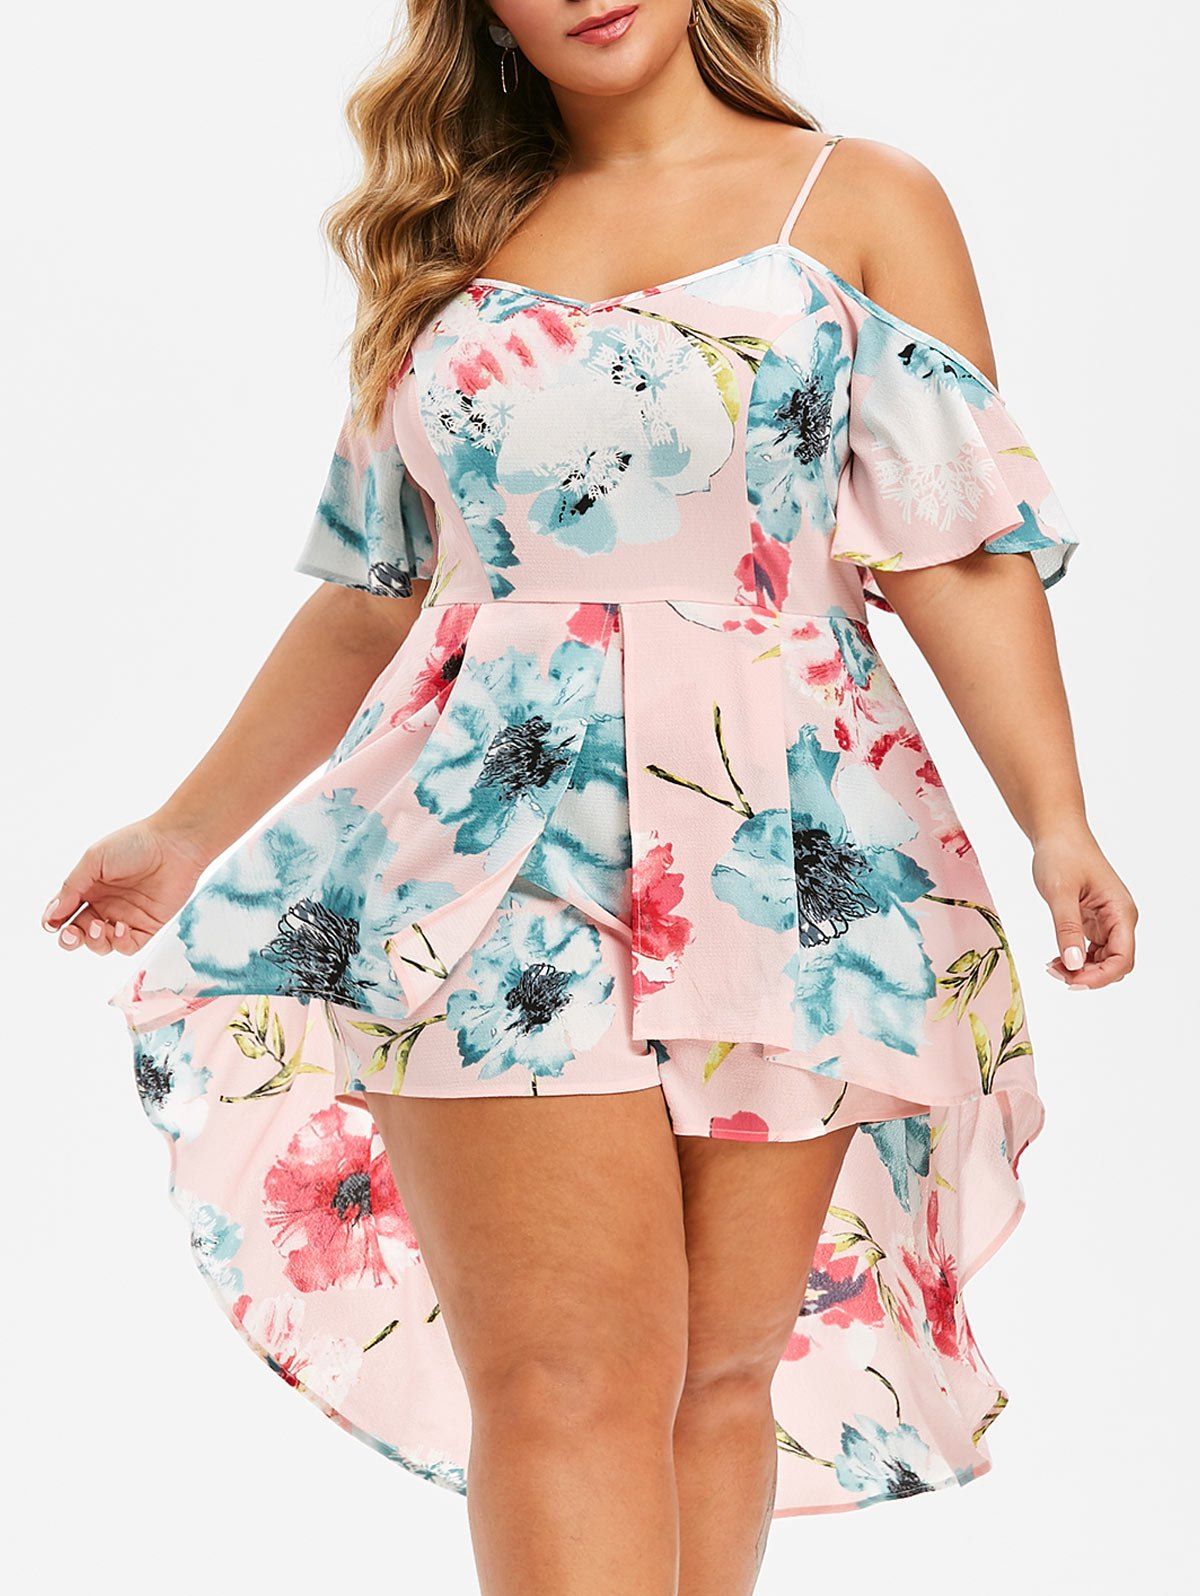 Plus Size Floral Print Overlay Cami Romper - PINK 1X